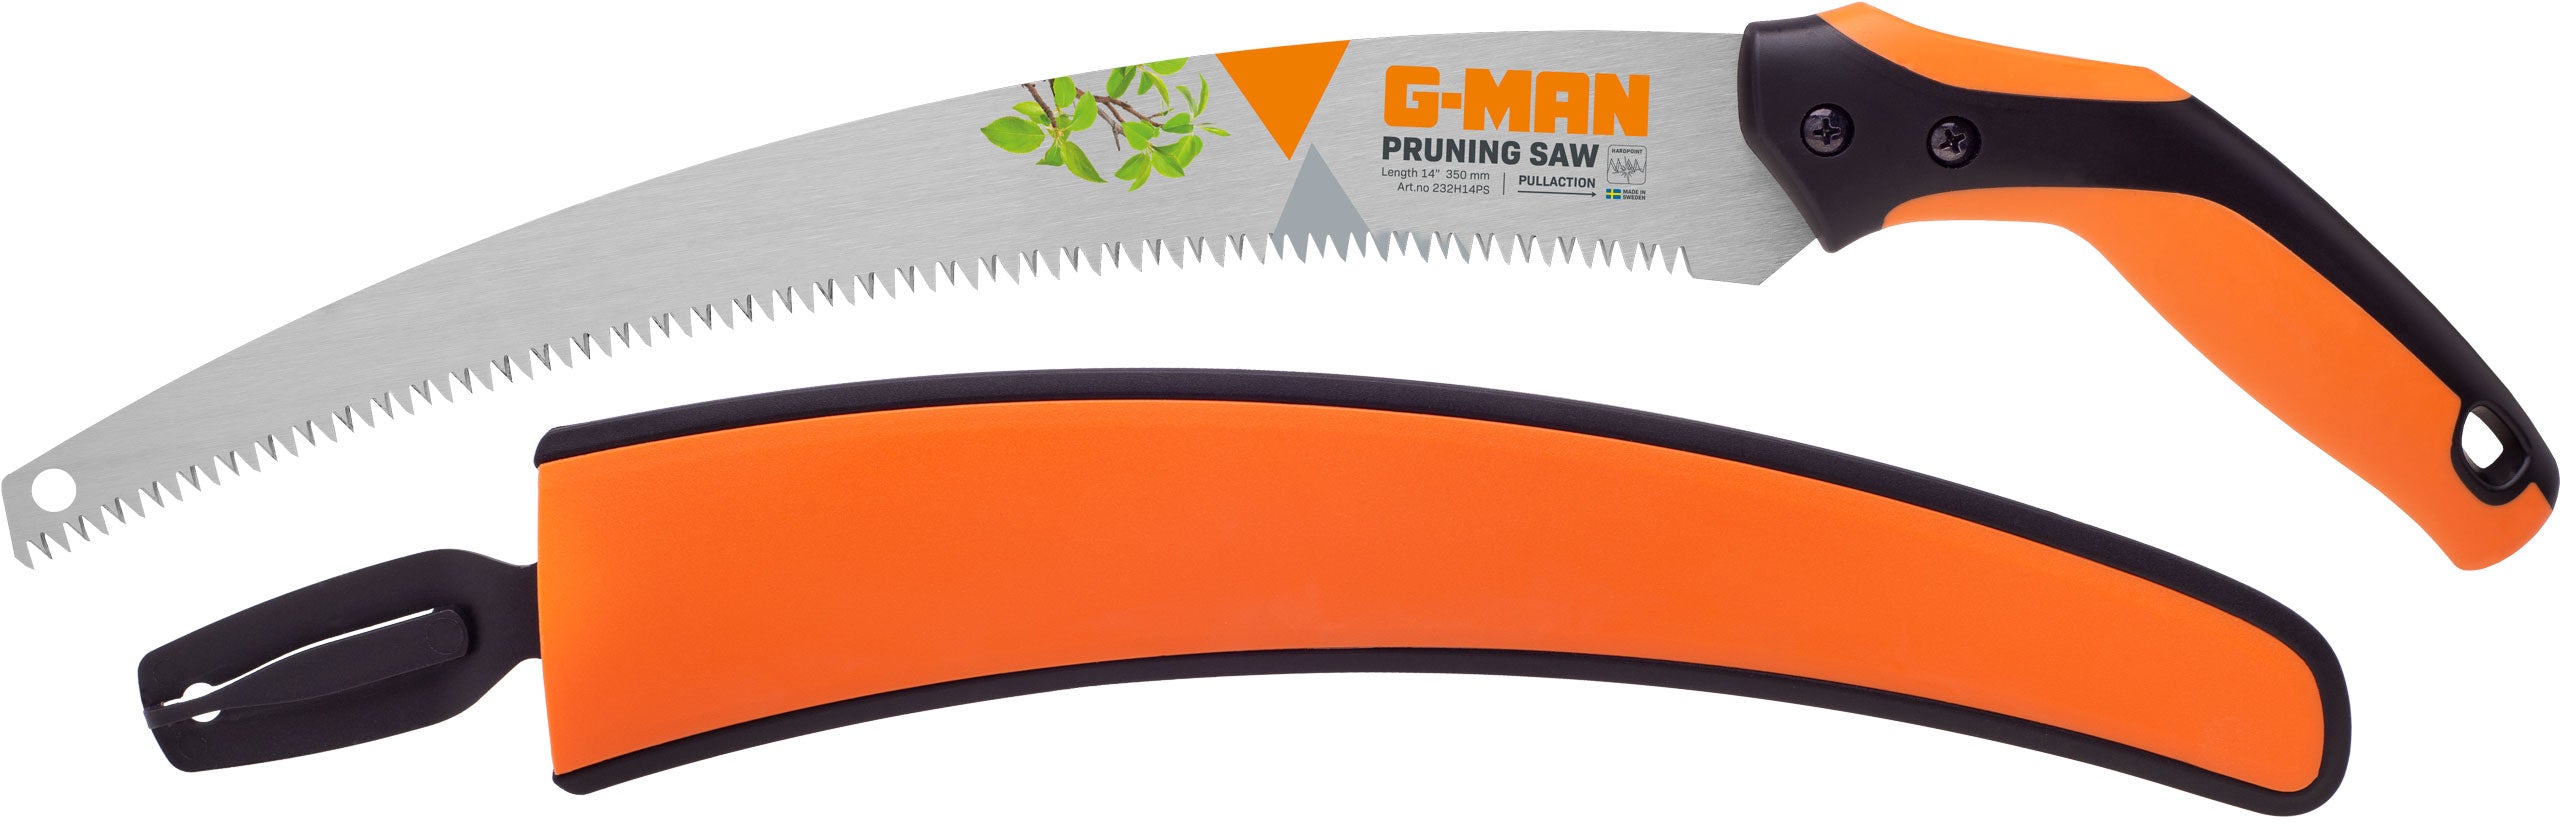 G-Man 232H Pruning Saw 14-Inch with Holster